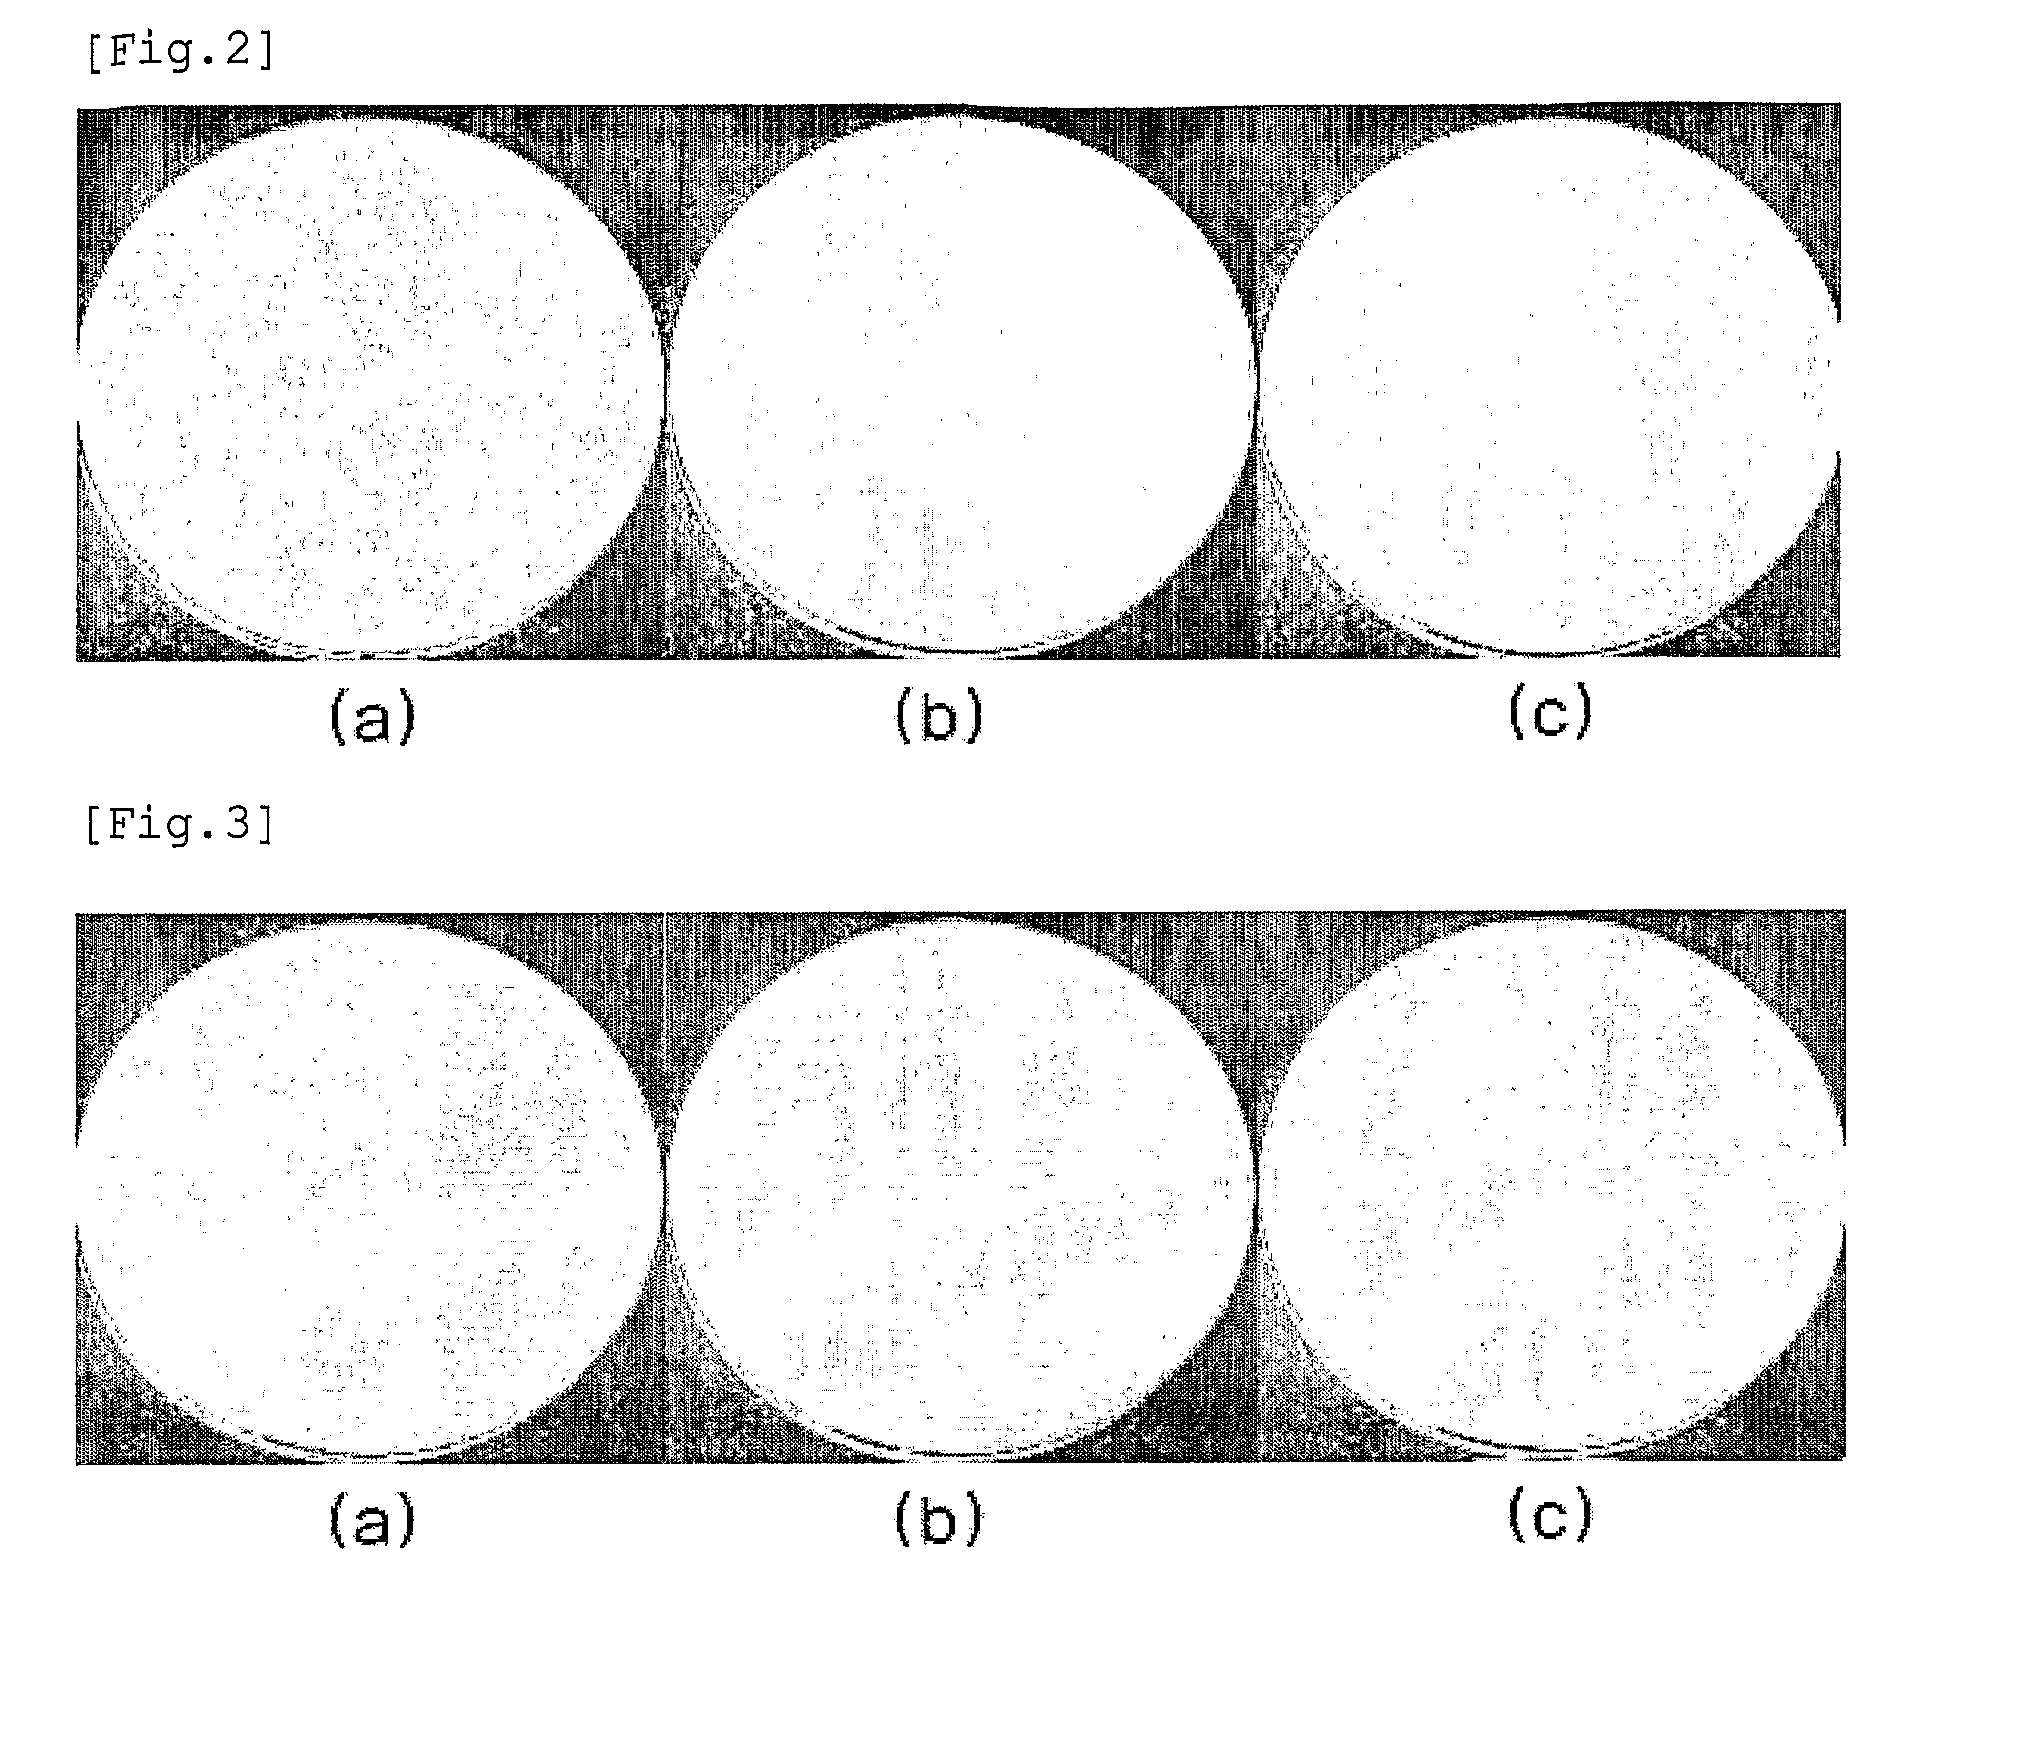 Antibacterial composition containing organic silver complexes, antibacterial treatment methods using the same and antibacterial formed article